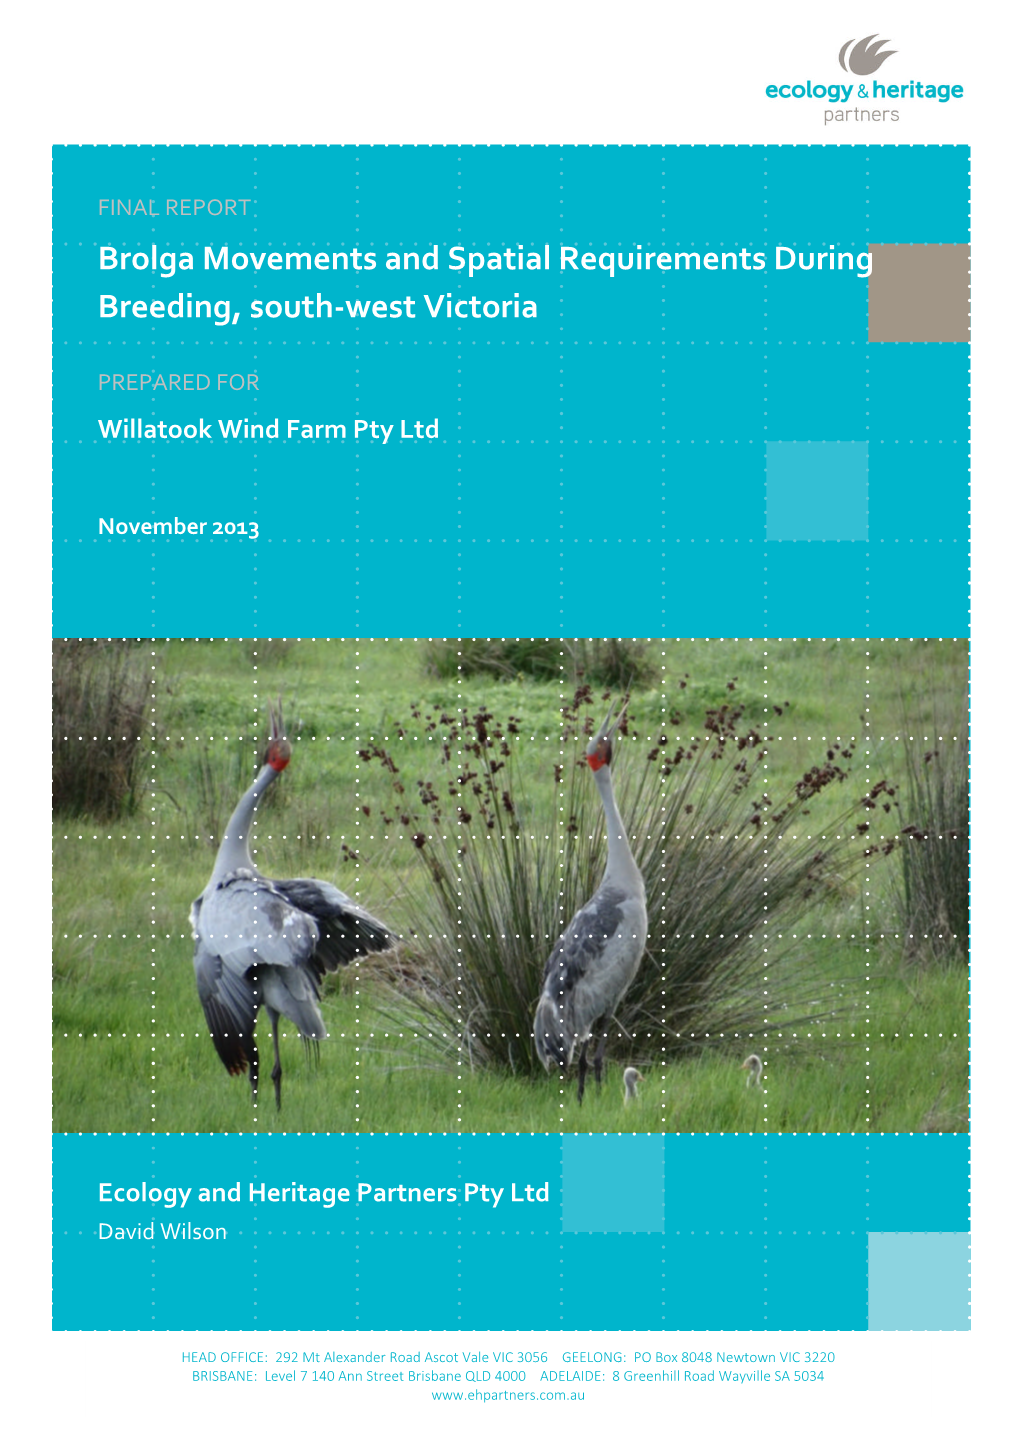 Brolga Movements and Spatial Requirements During Breeding, South-West Victoria